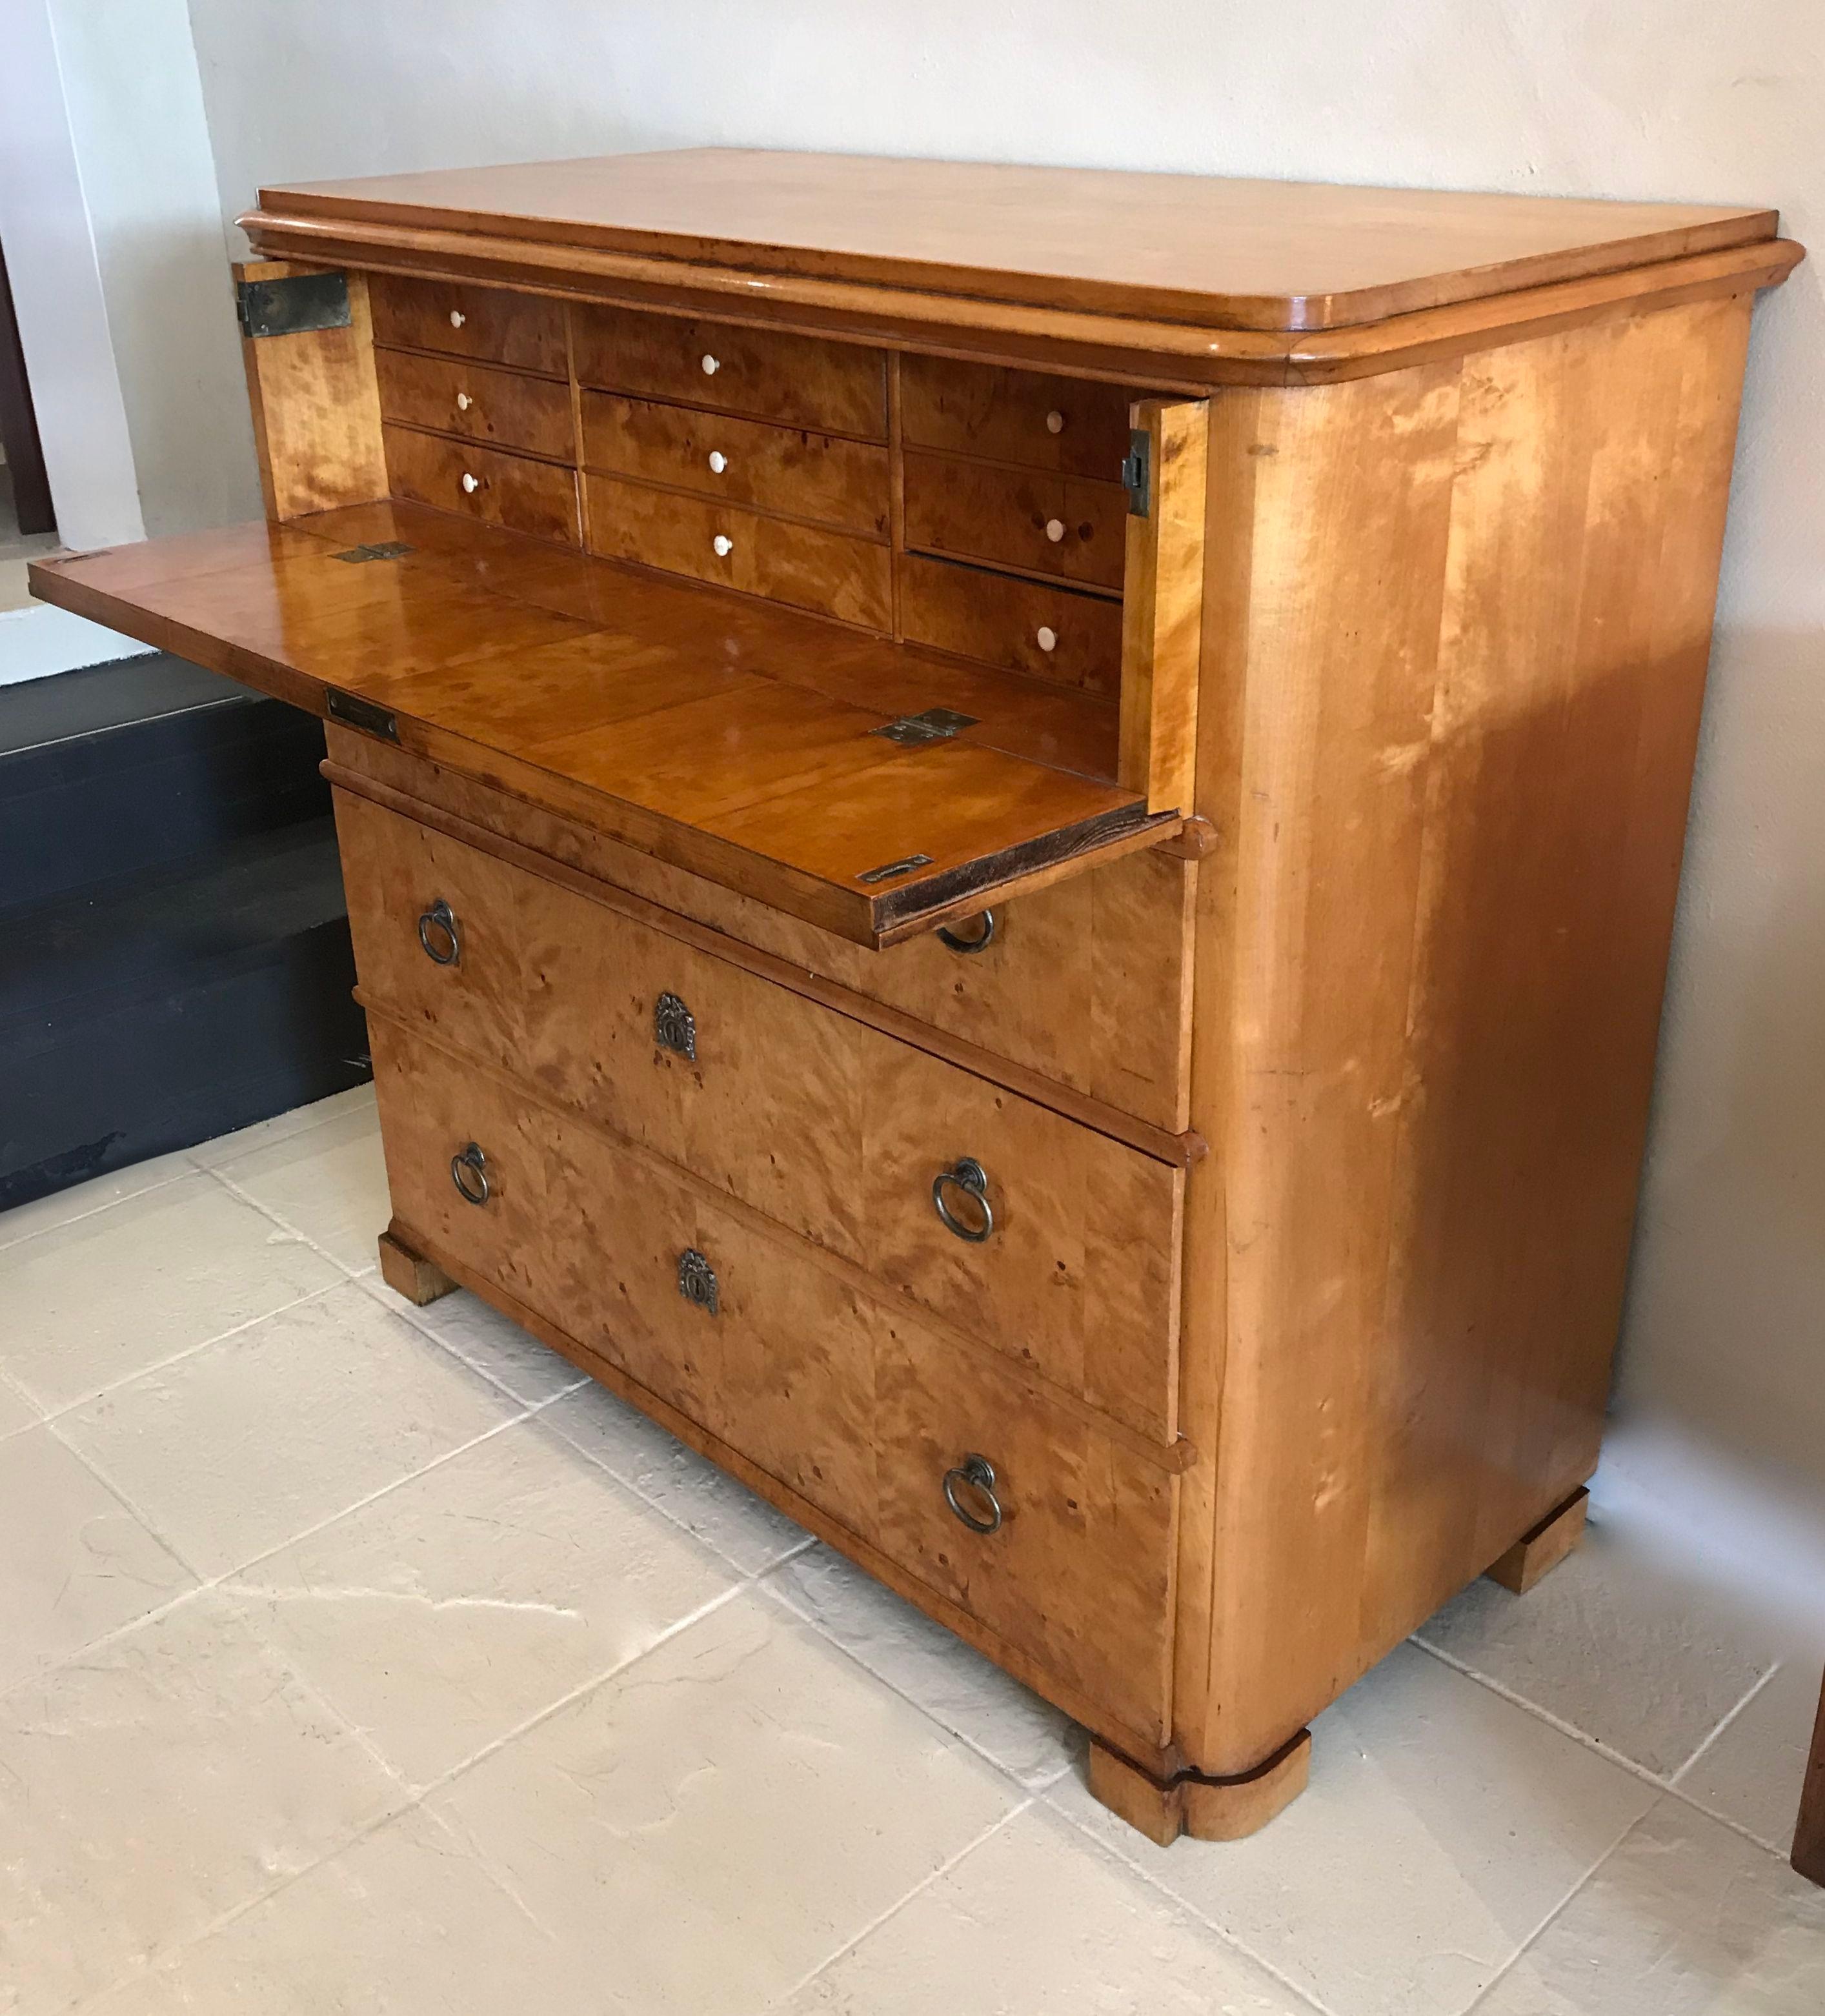 Flame birch Biedermeier secretaire chest with lovely small proportions. The top draw drops down to a writing area with several small fitted drawers to the interior. There are three generous sized drawers below the writing section.